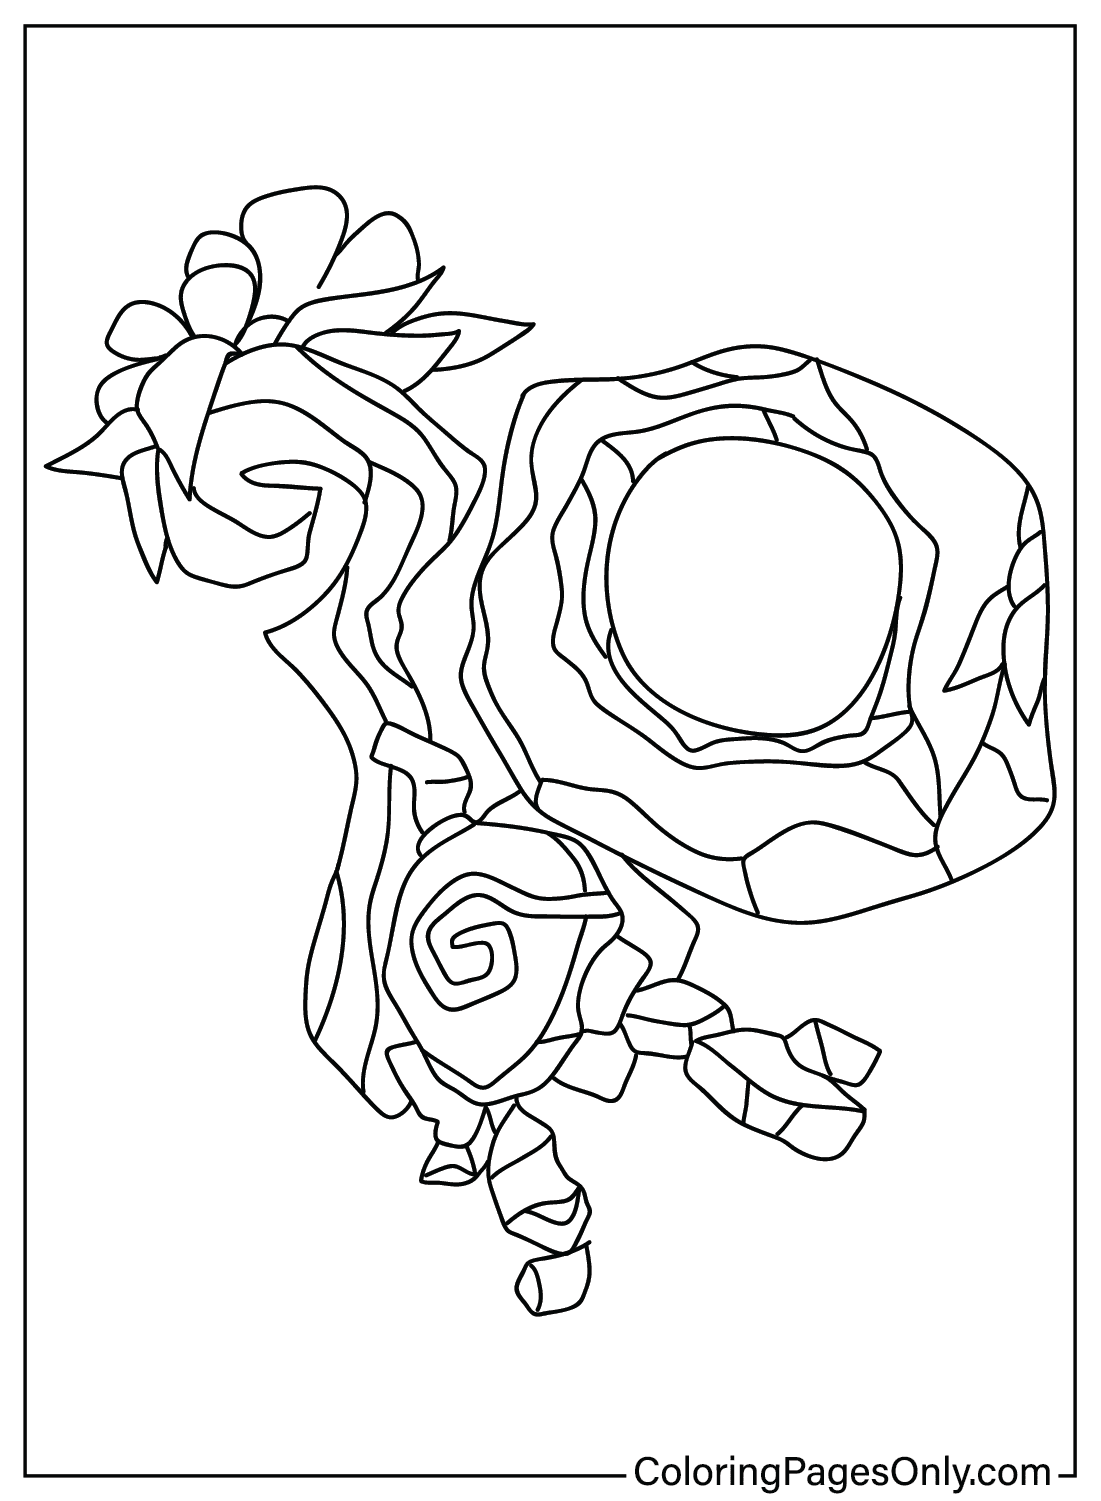 Coloring Page Teamfight Tactics from Teamfight Tactics